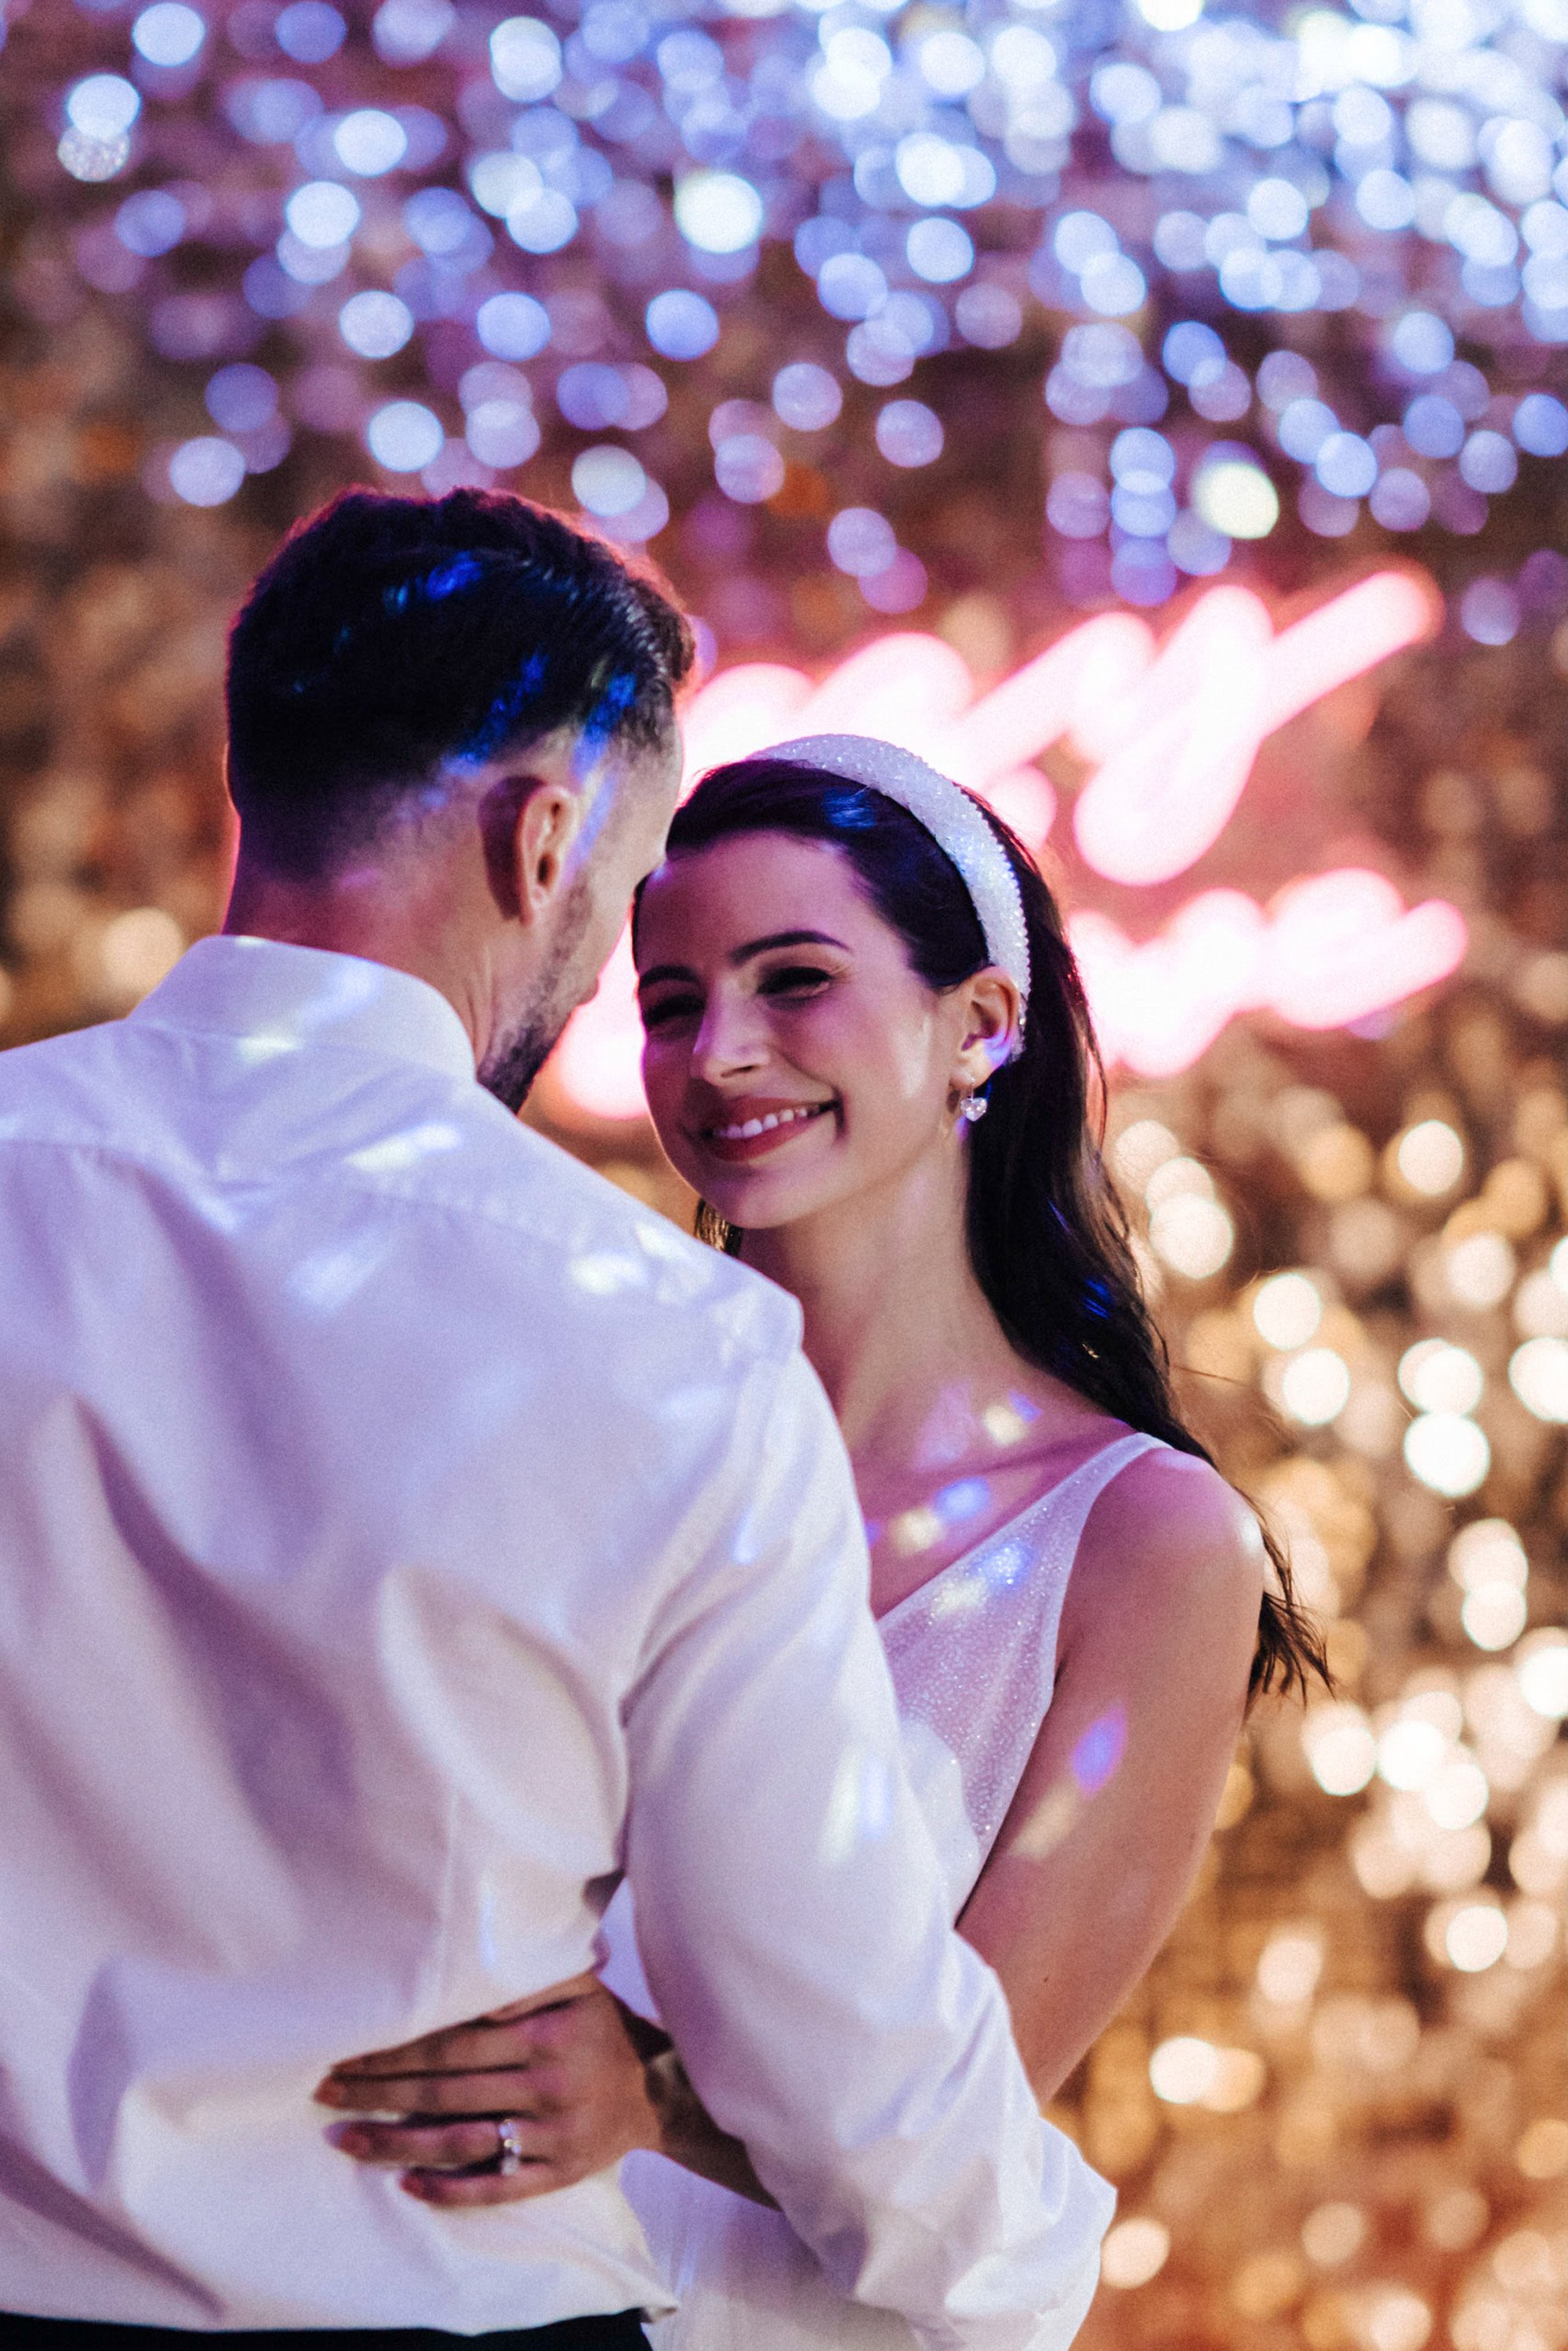 Beautiful bride in pearl earrings and headpiece smiles dances with groom against sequin backdrop